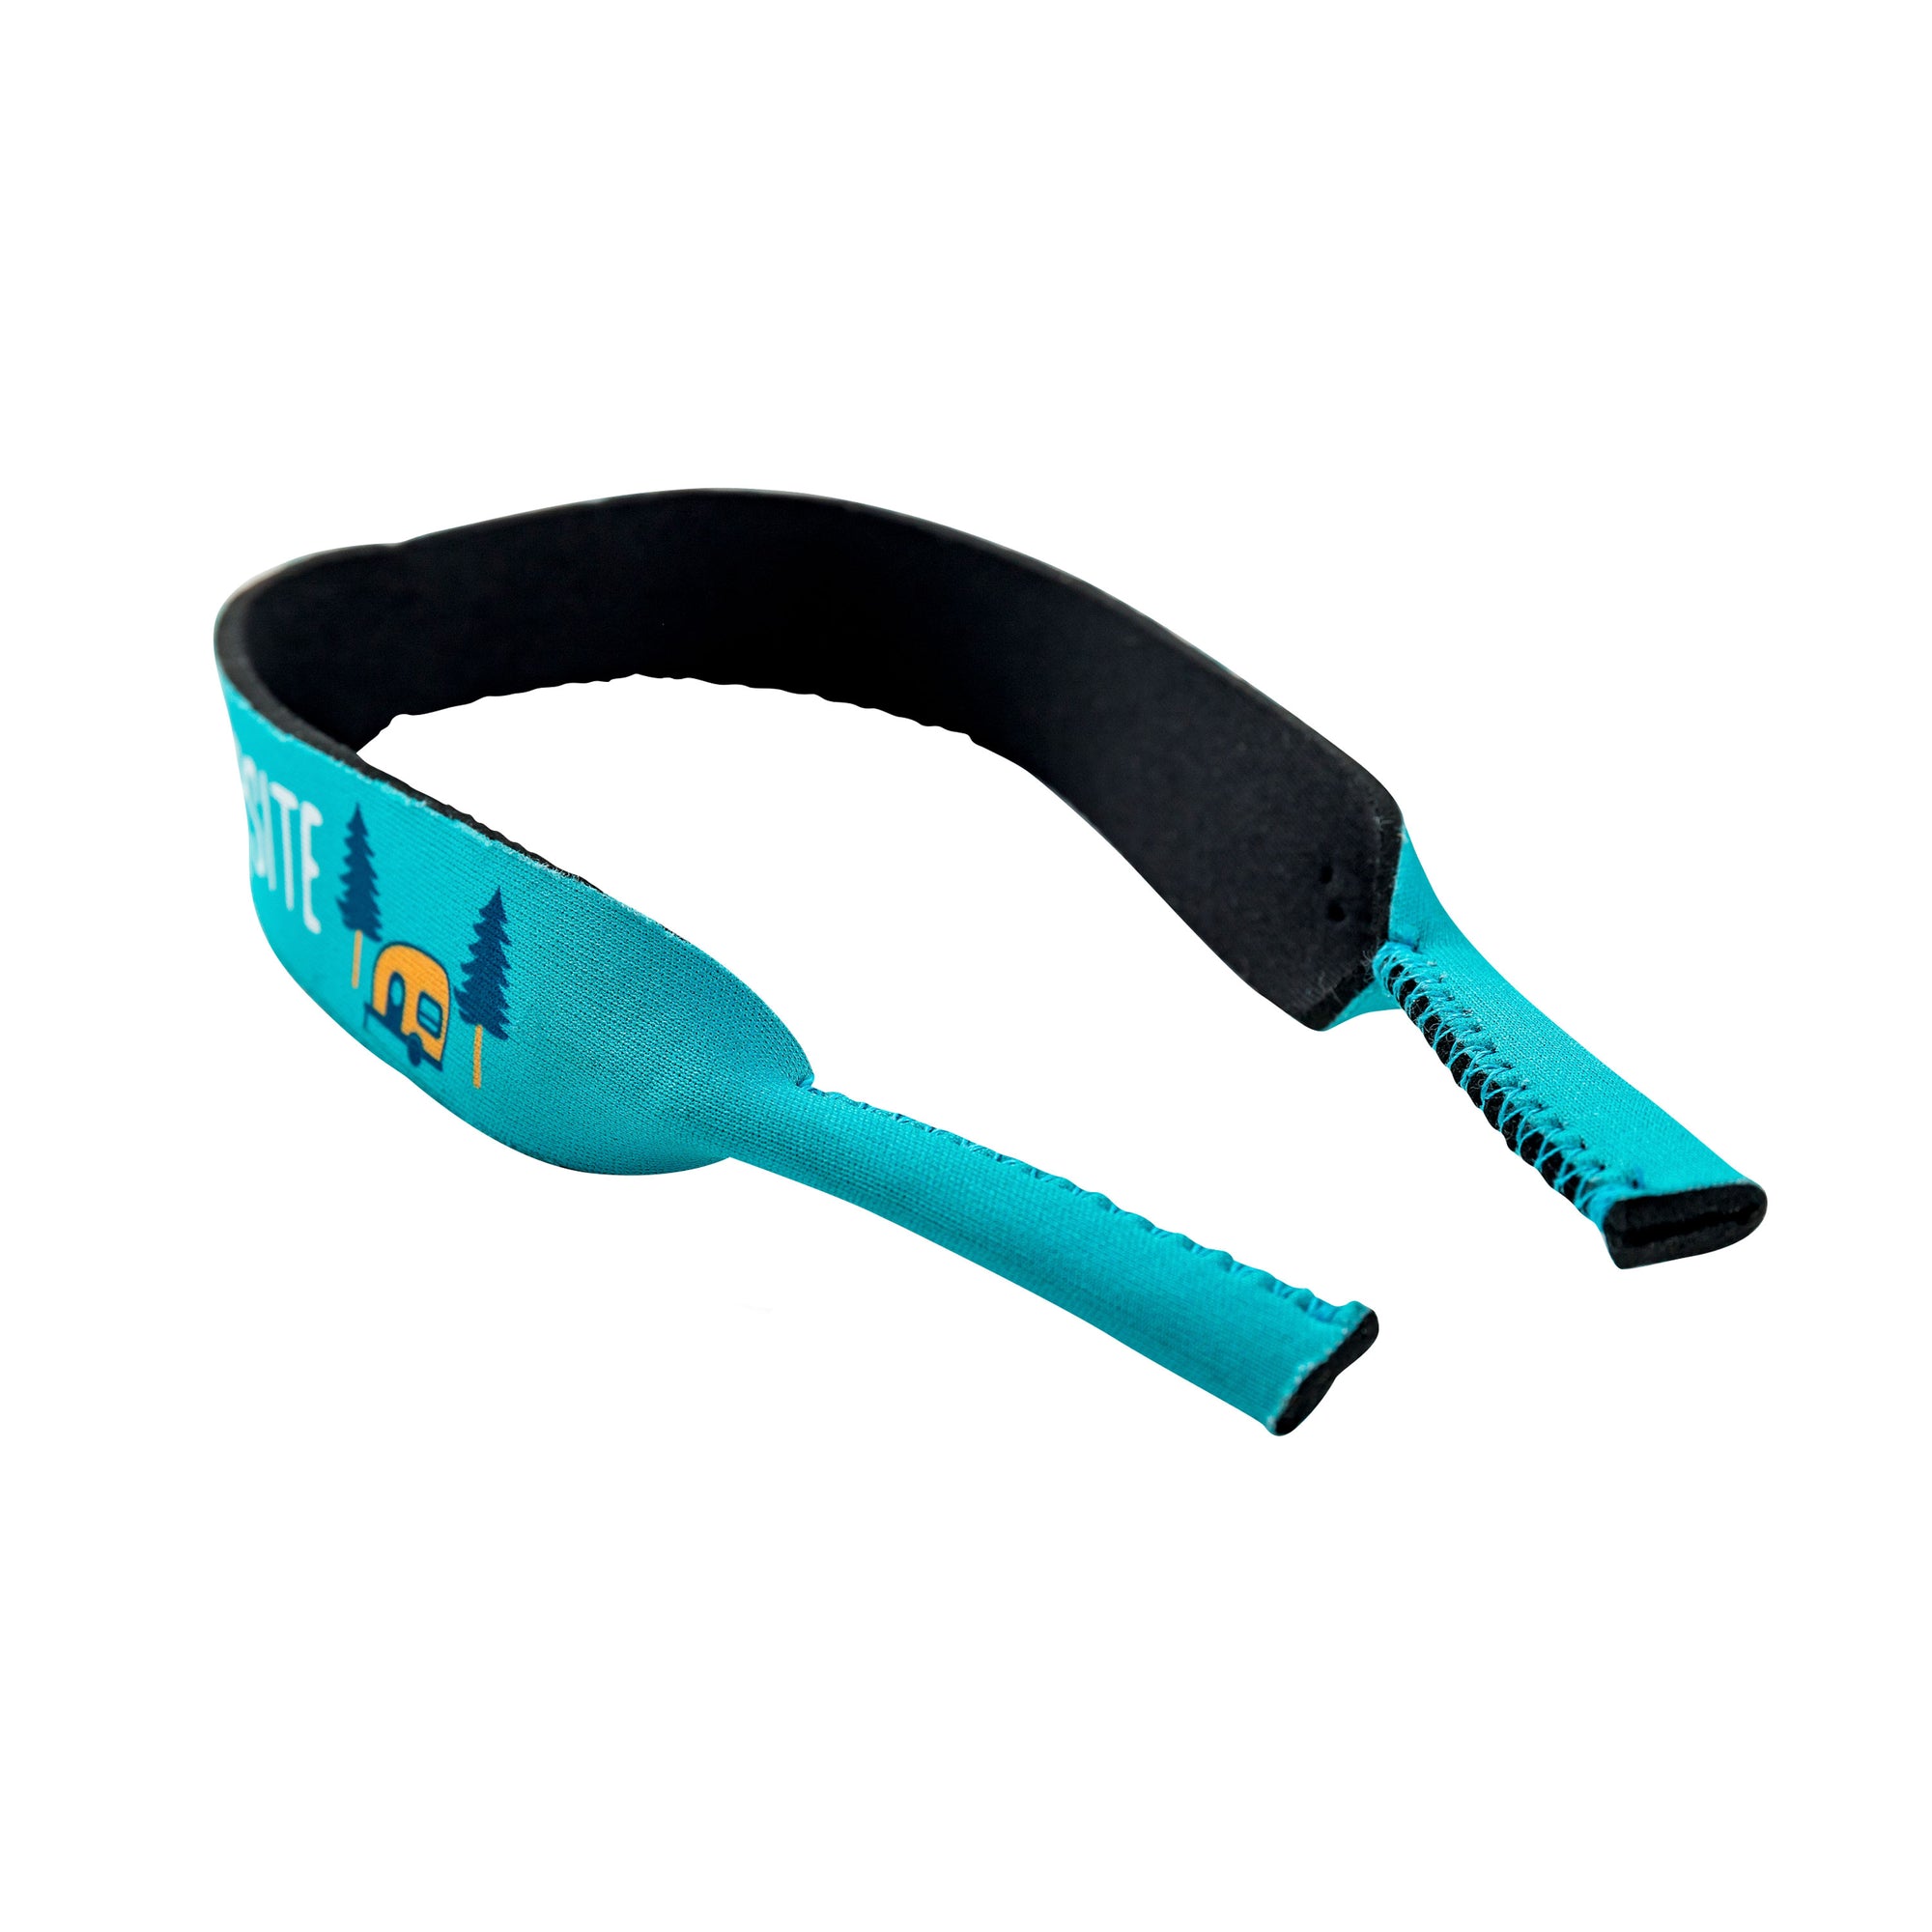 Camco 53243 "Life is Better at the Campsite" Sunglass Strap - Teal Teardrop